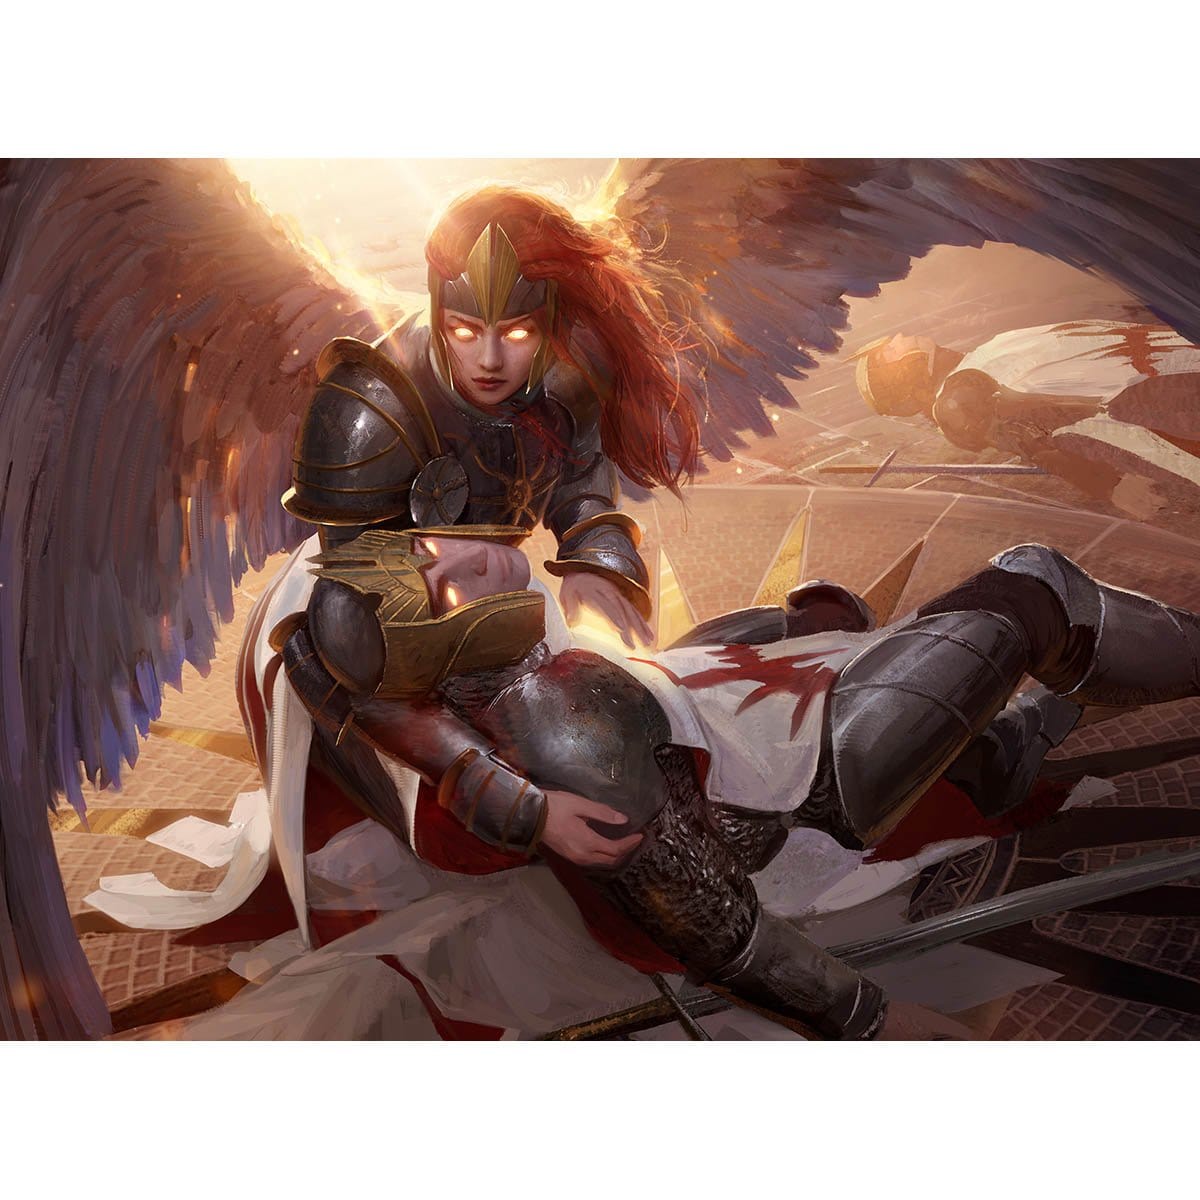 Chance for Glory Print - Print - Original Magic Art - Accessories for Magic the Gathering and other card games